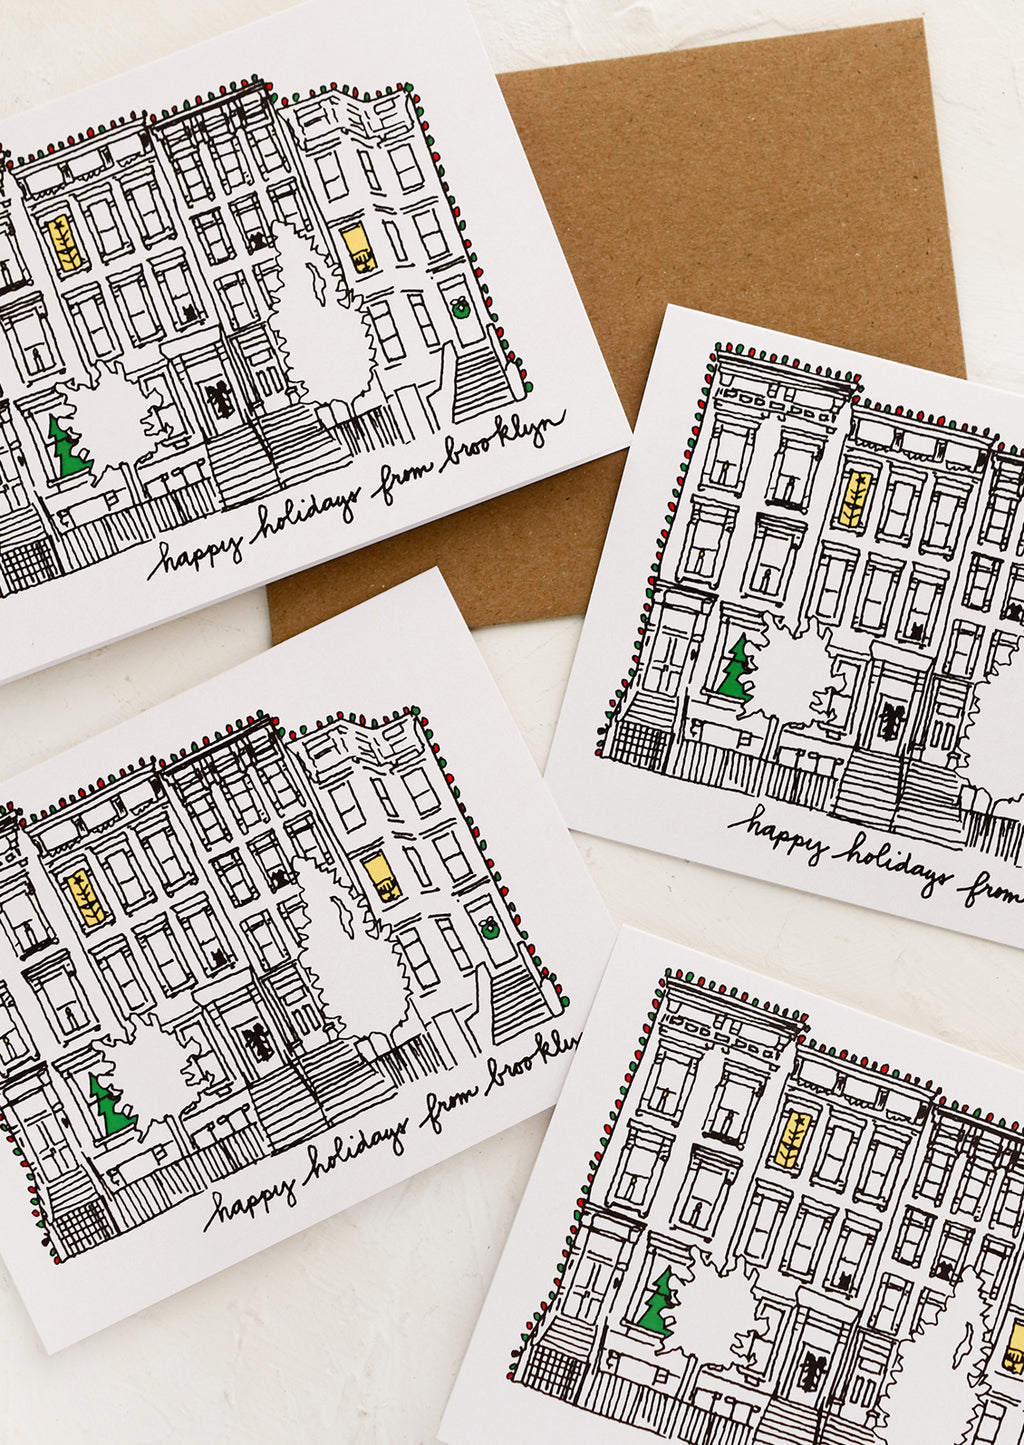 Boxed Set Of 8: A set of cards with drawing of brownstone and text reading "Happy holidays from Brooklyn".